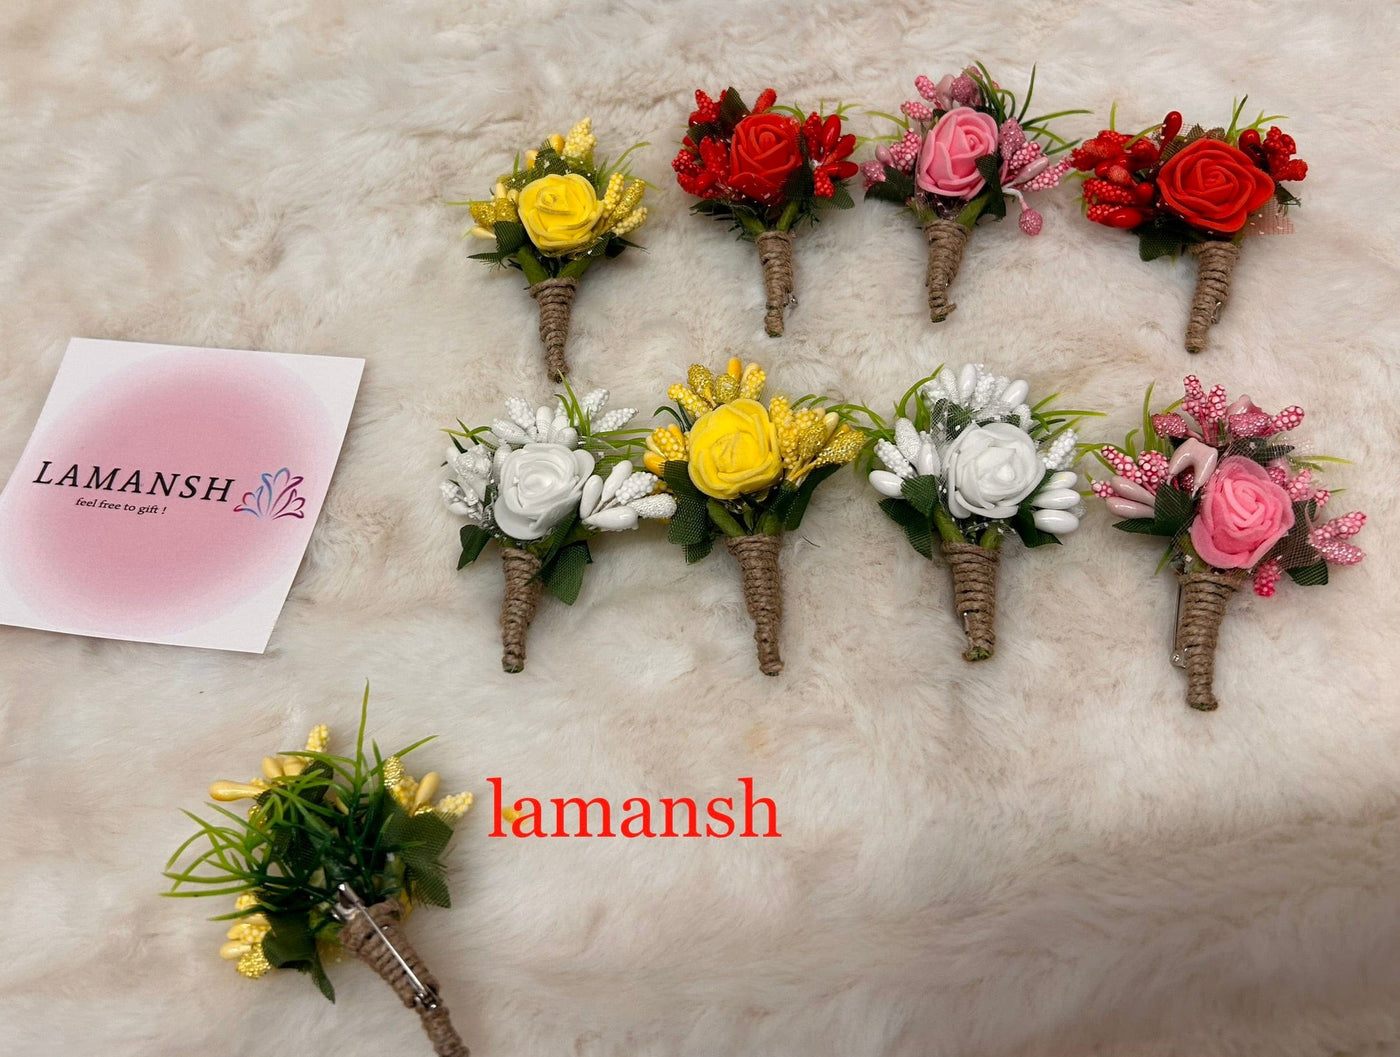 50 Rs each on buying 100 pieces | WhatsApp at 8619550223 Floral 🌺 Giveaways LAMANSH Designer Flower brooches 🌸 for barati's guests welcome in weddings